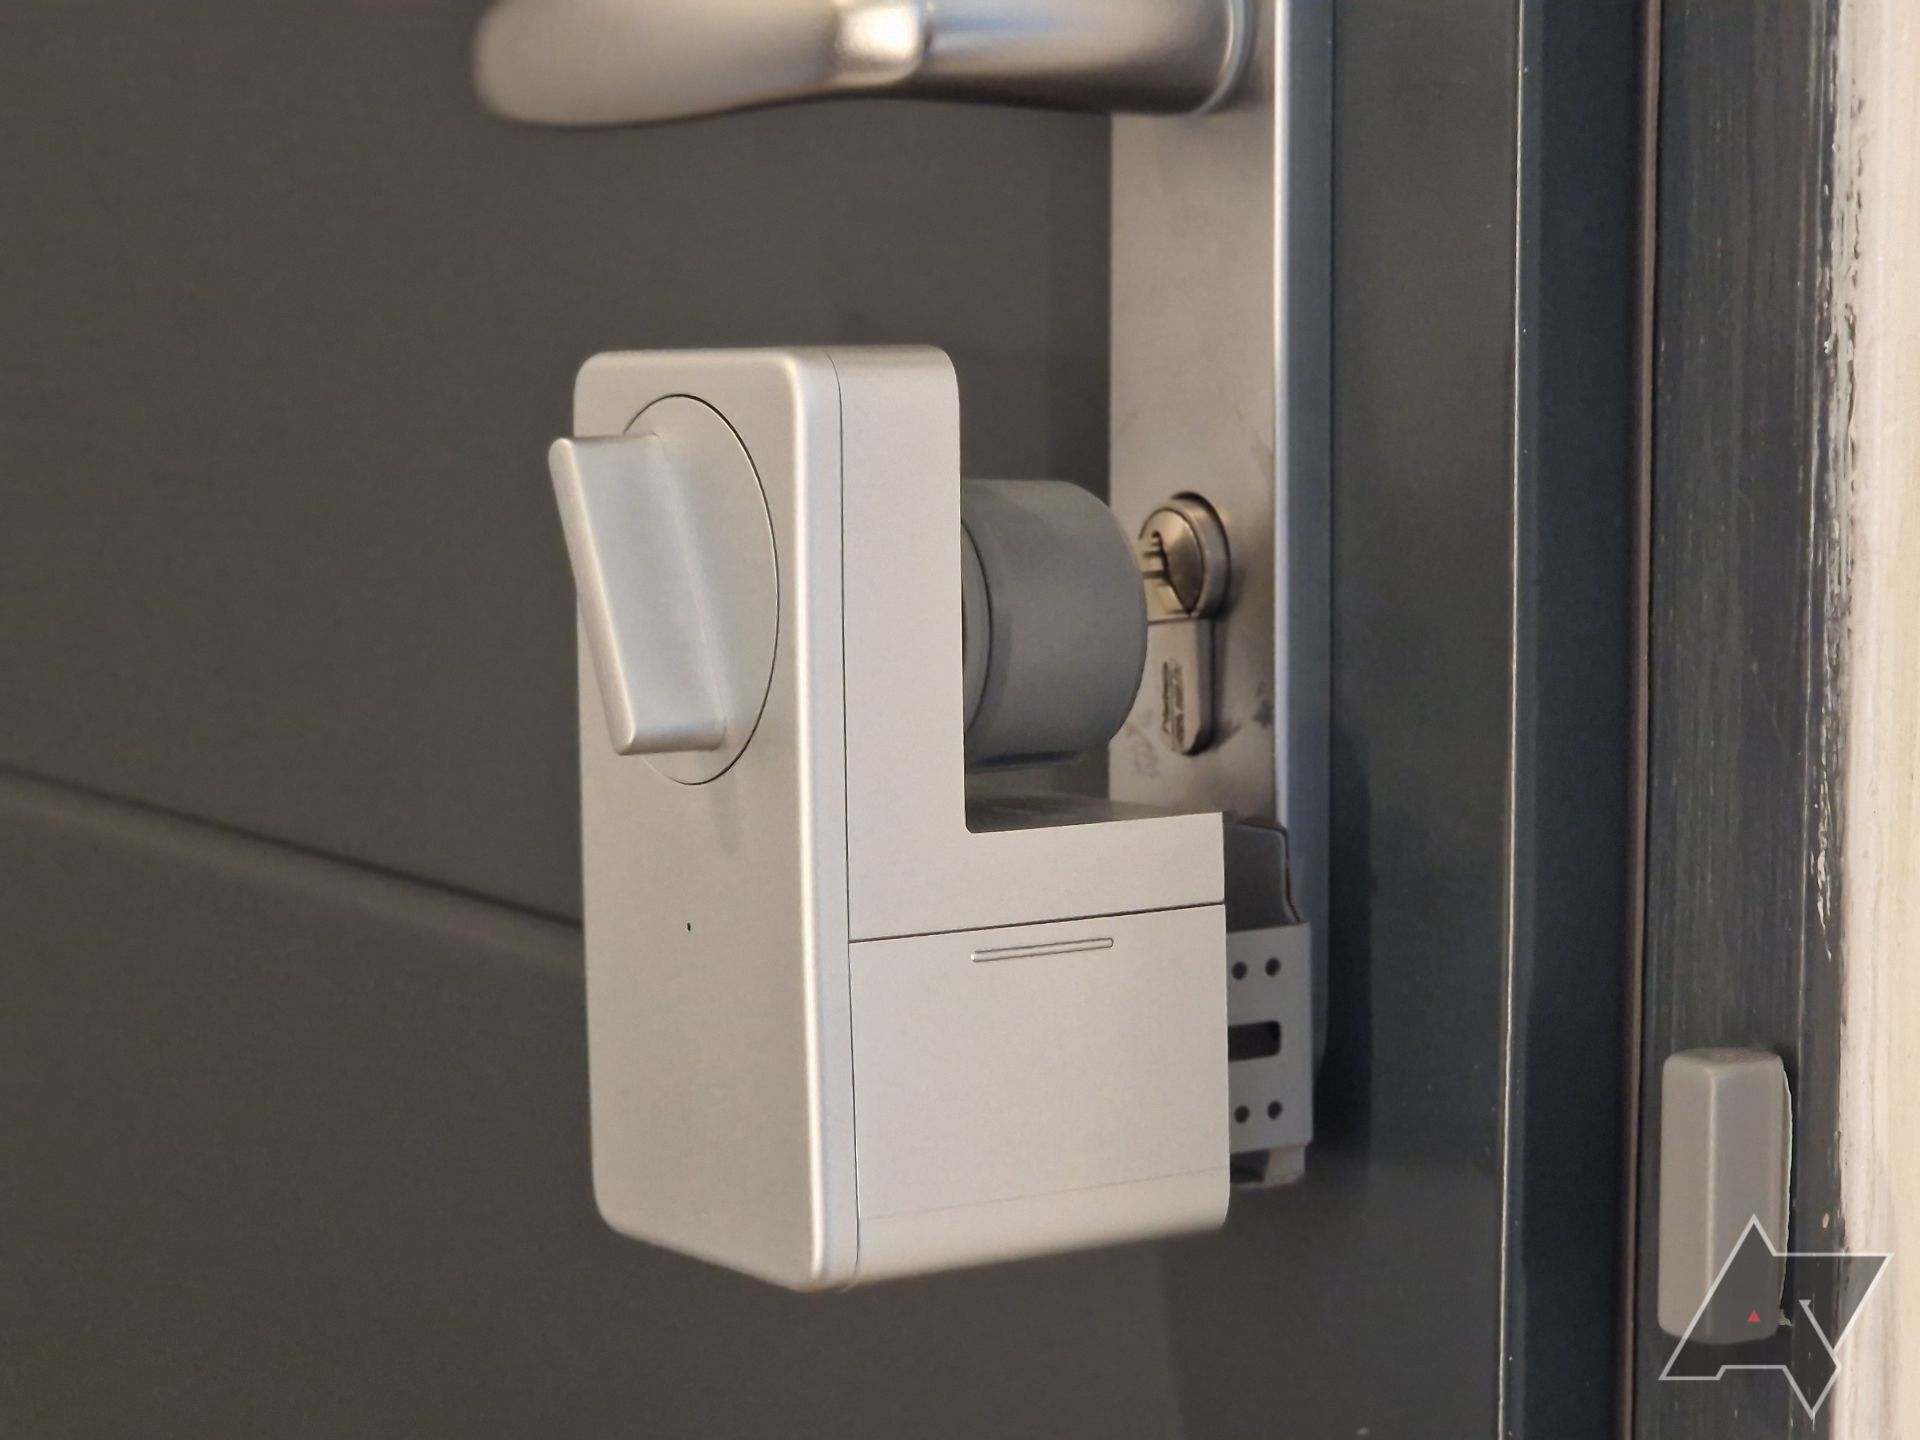 SwitchBot Lock: A potential smart lock solution for renters and